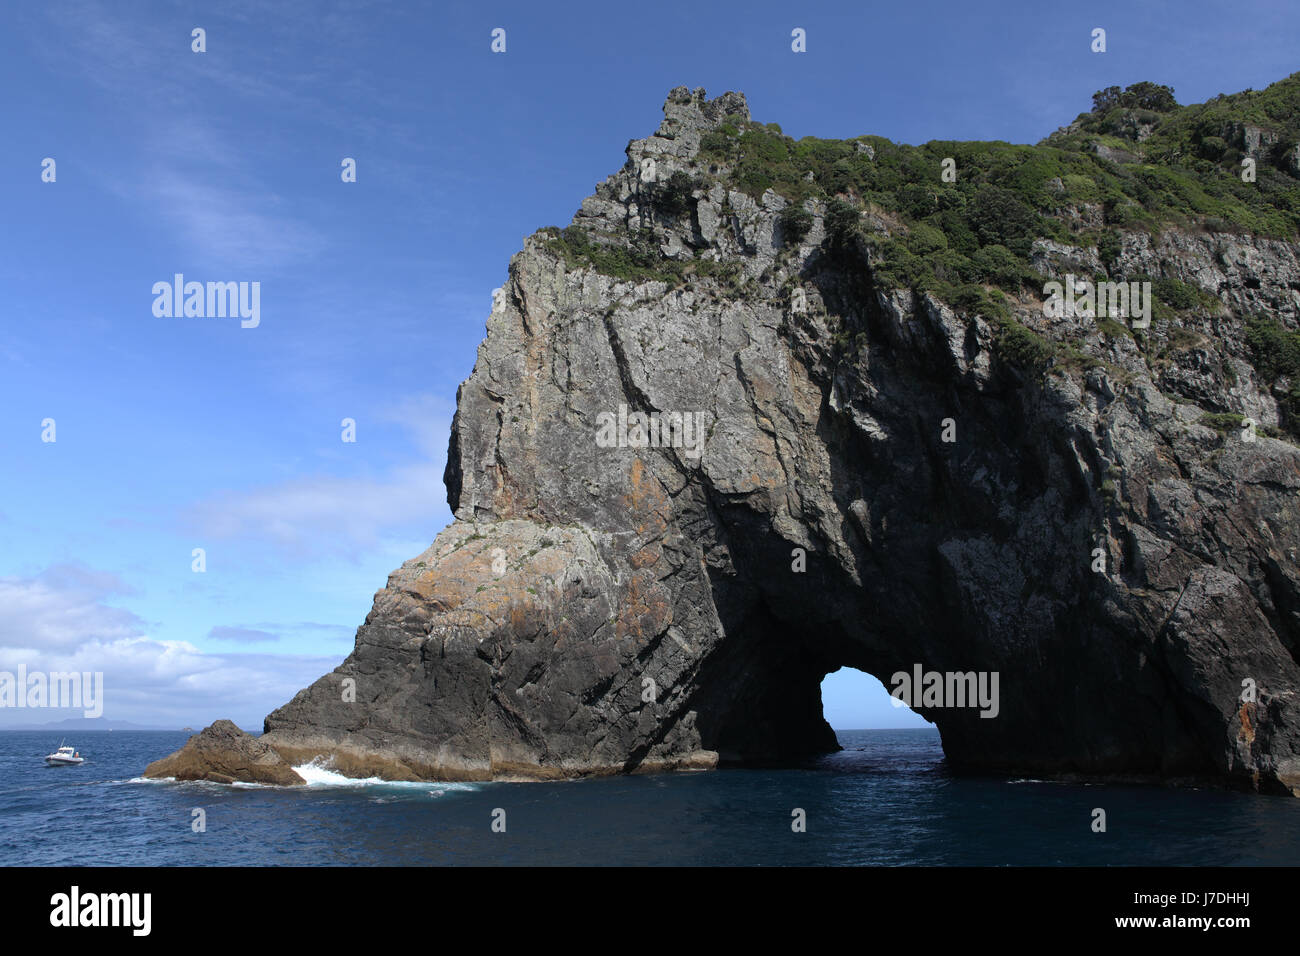 bay of islands in new zealand Stock Photo